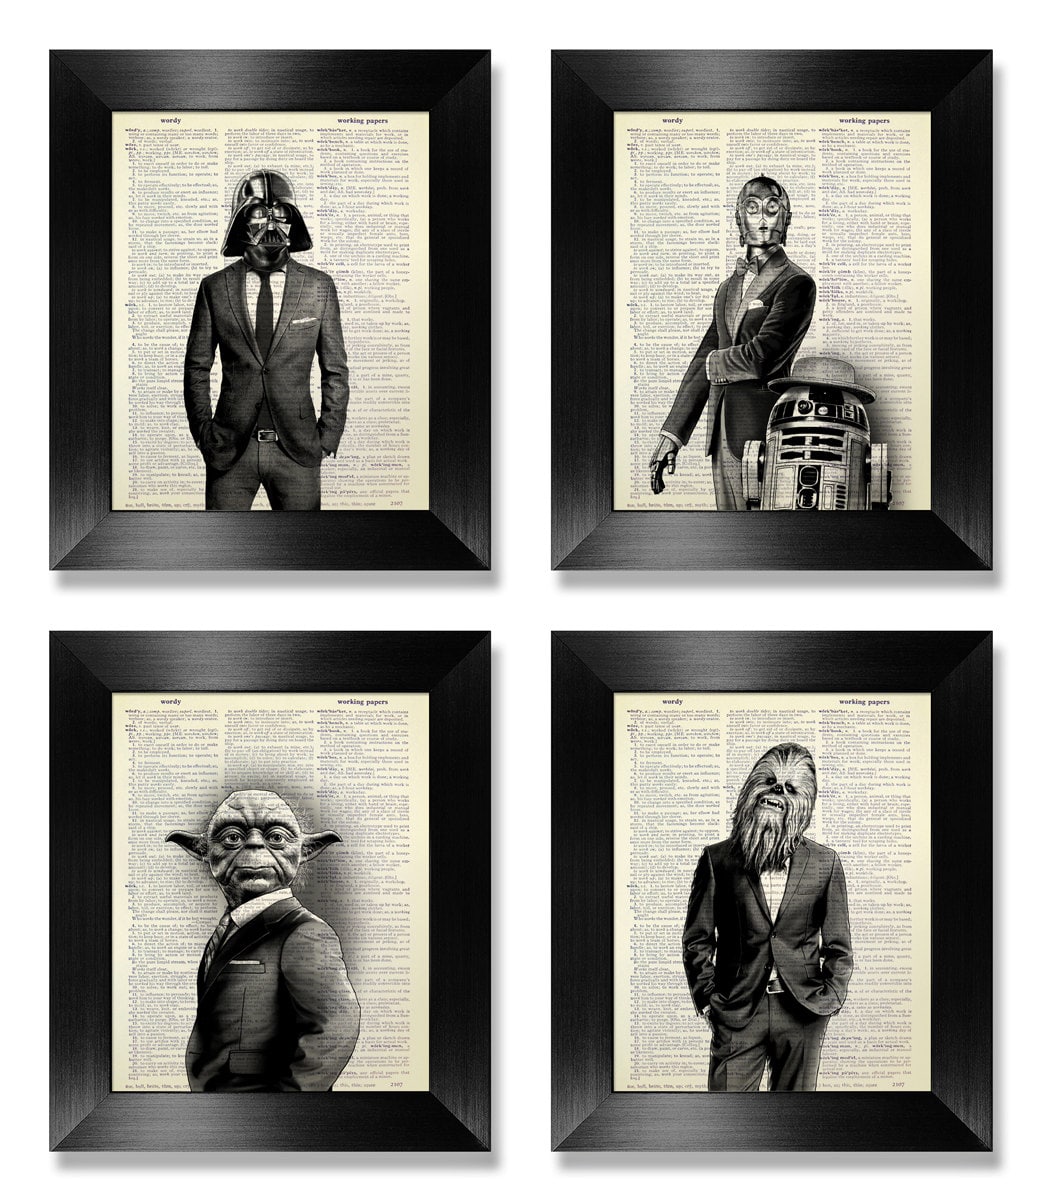 STAR WARS GALAXY CAST OF CHARACTERS POSTER 36X24 NEW FREE SHIPPING 